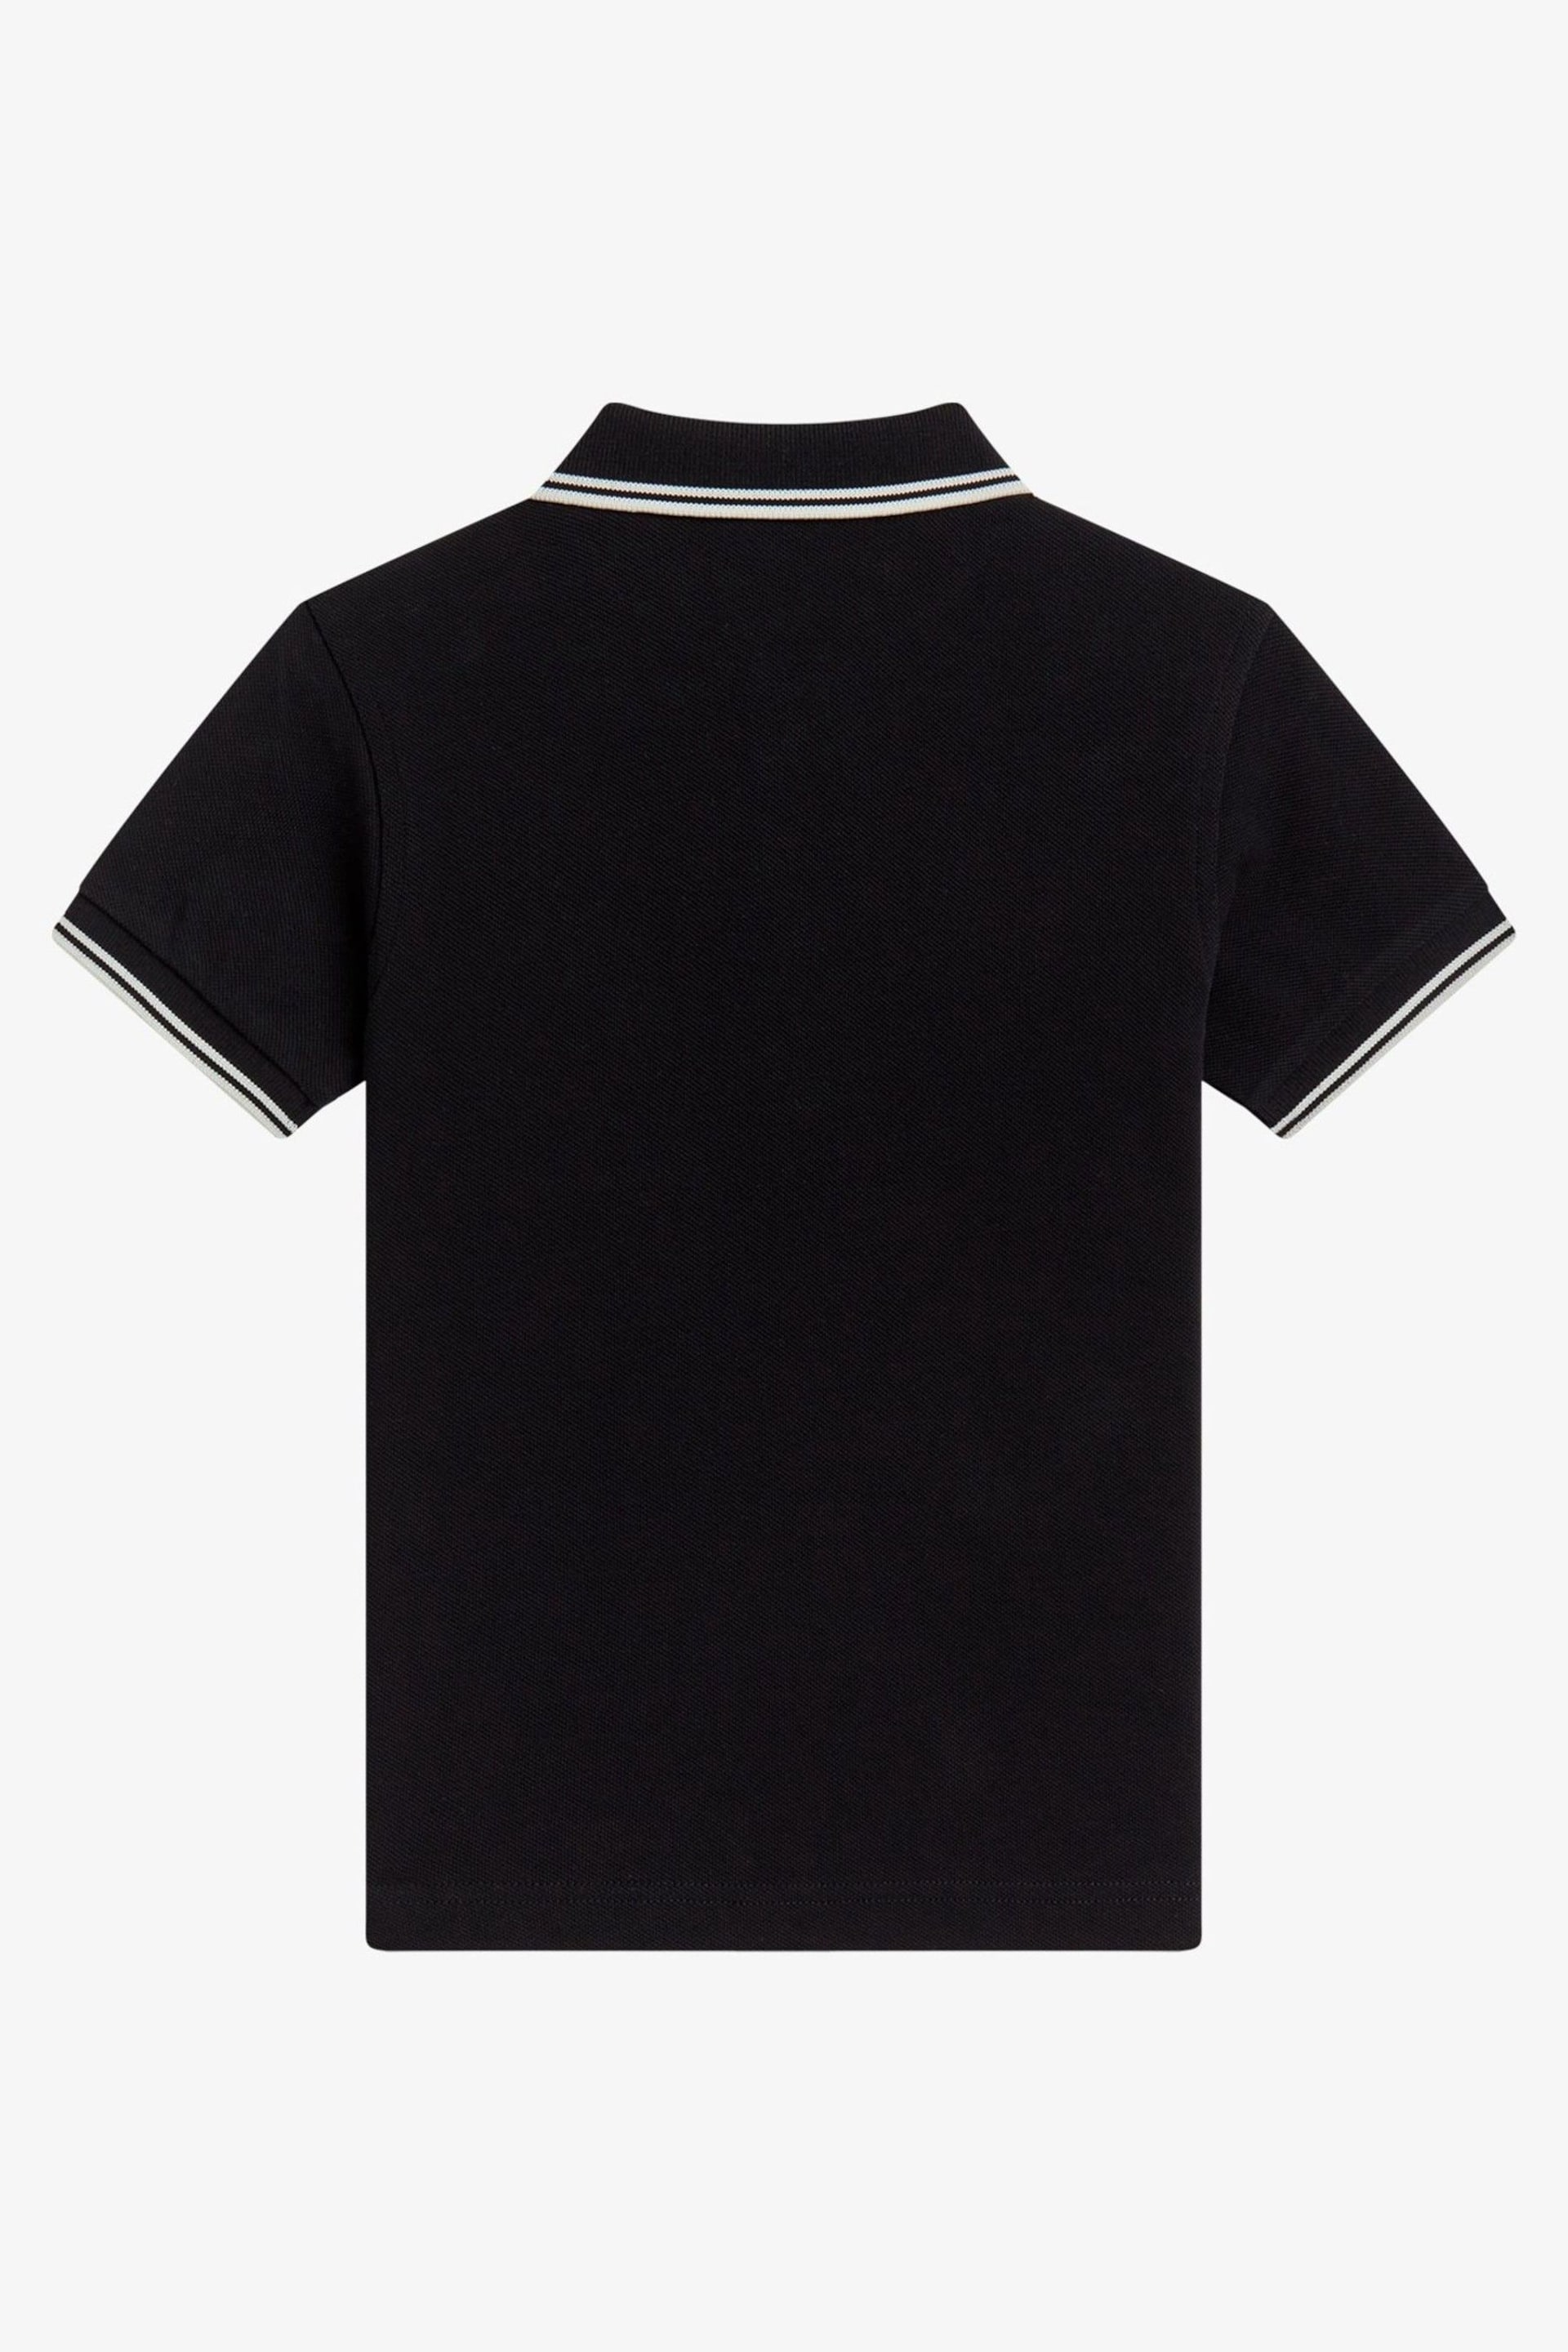 Fred Perry Kids Twin Tipped Polo Shirt - Image 4 of 4